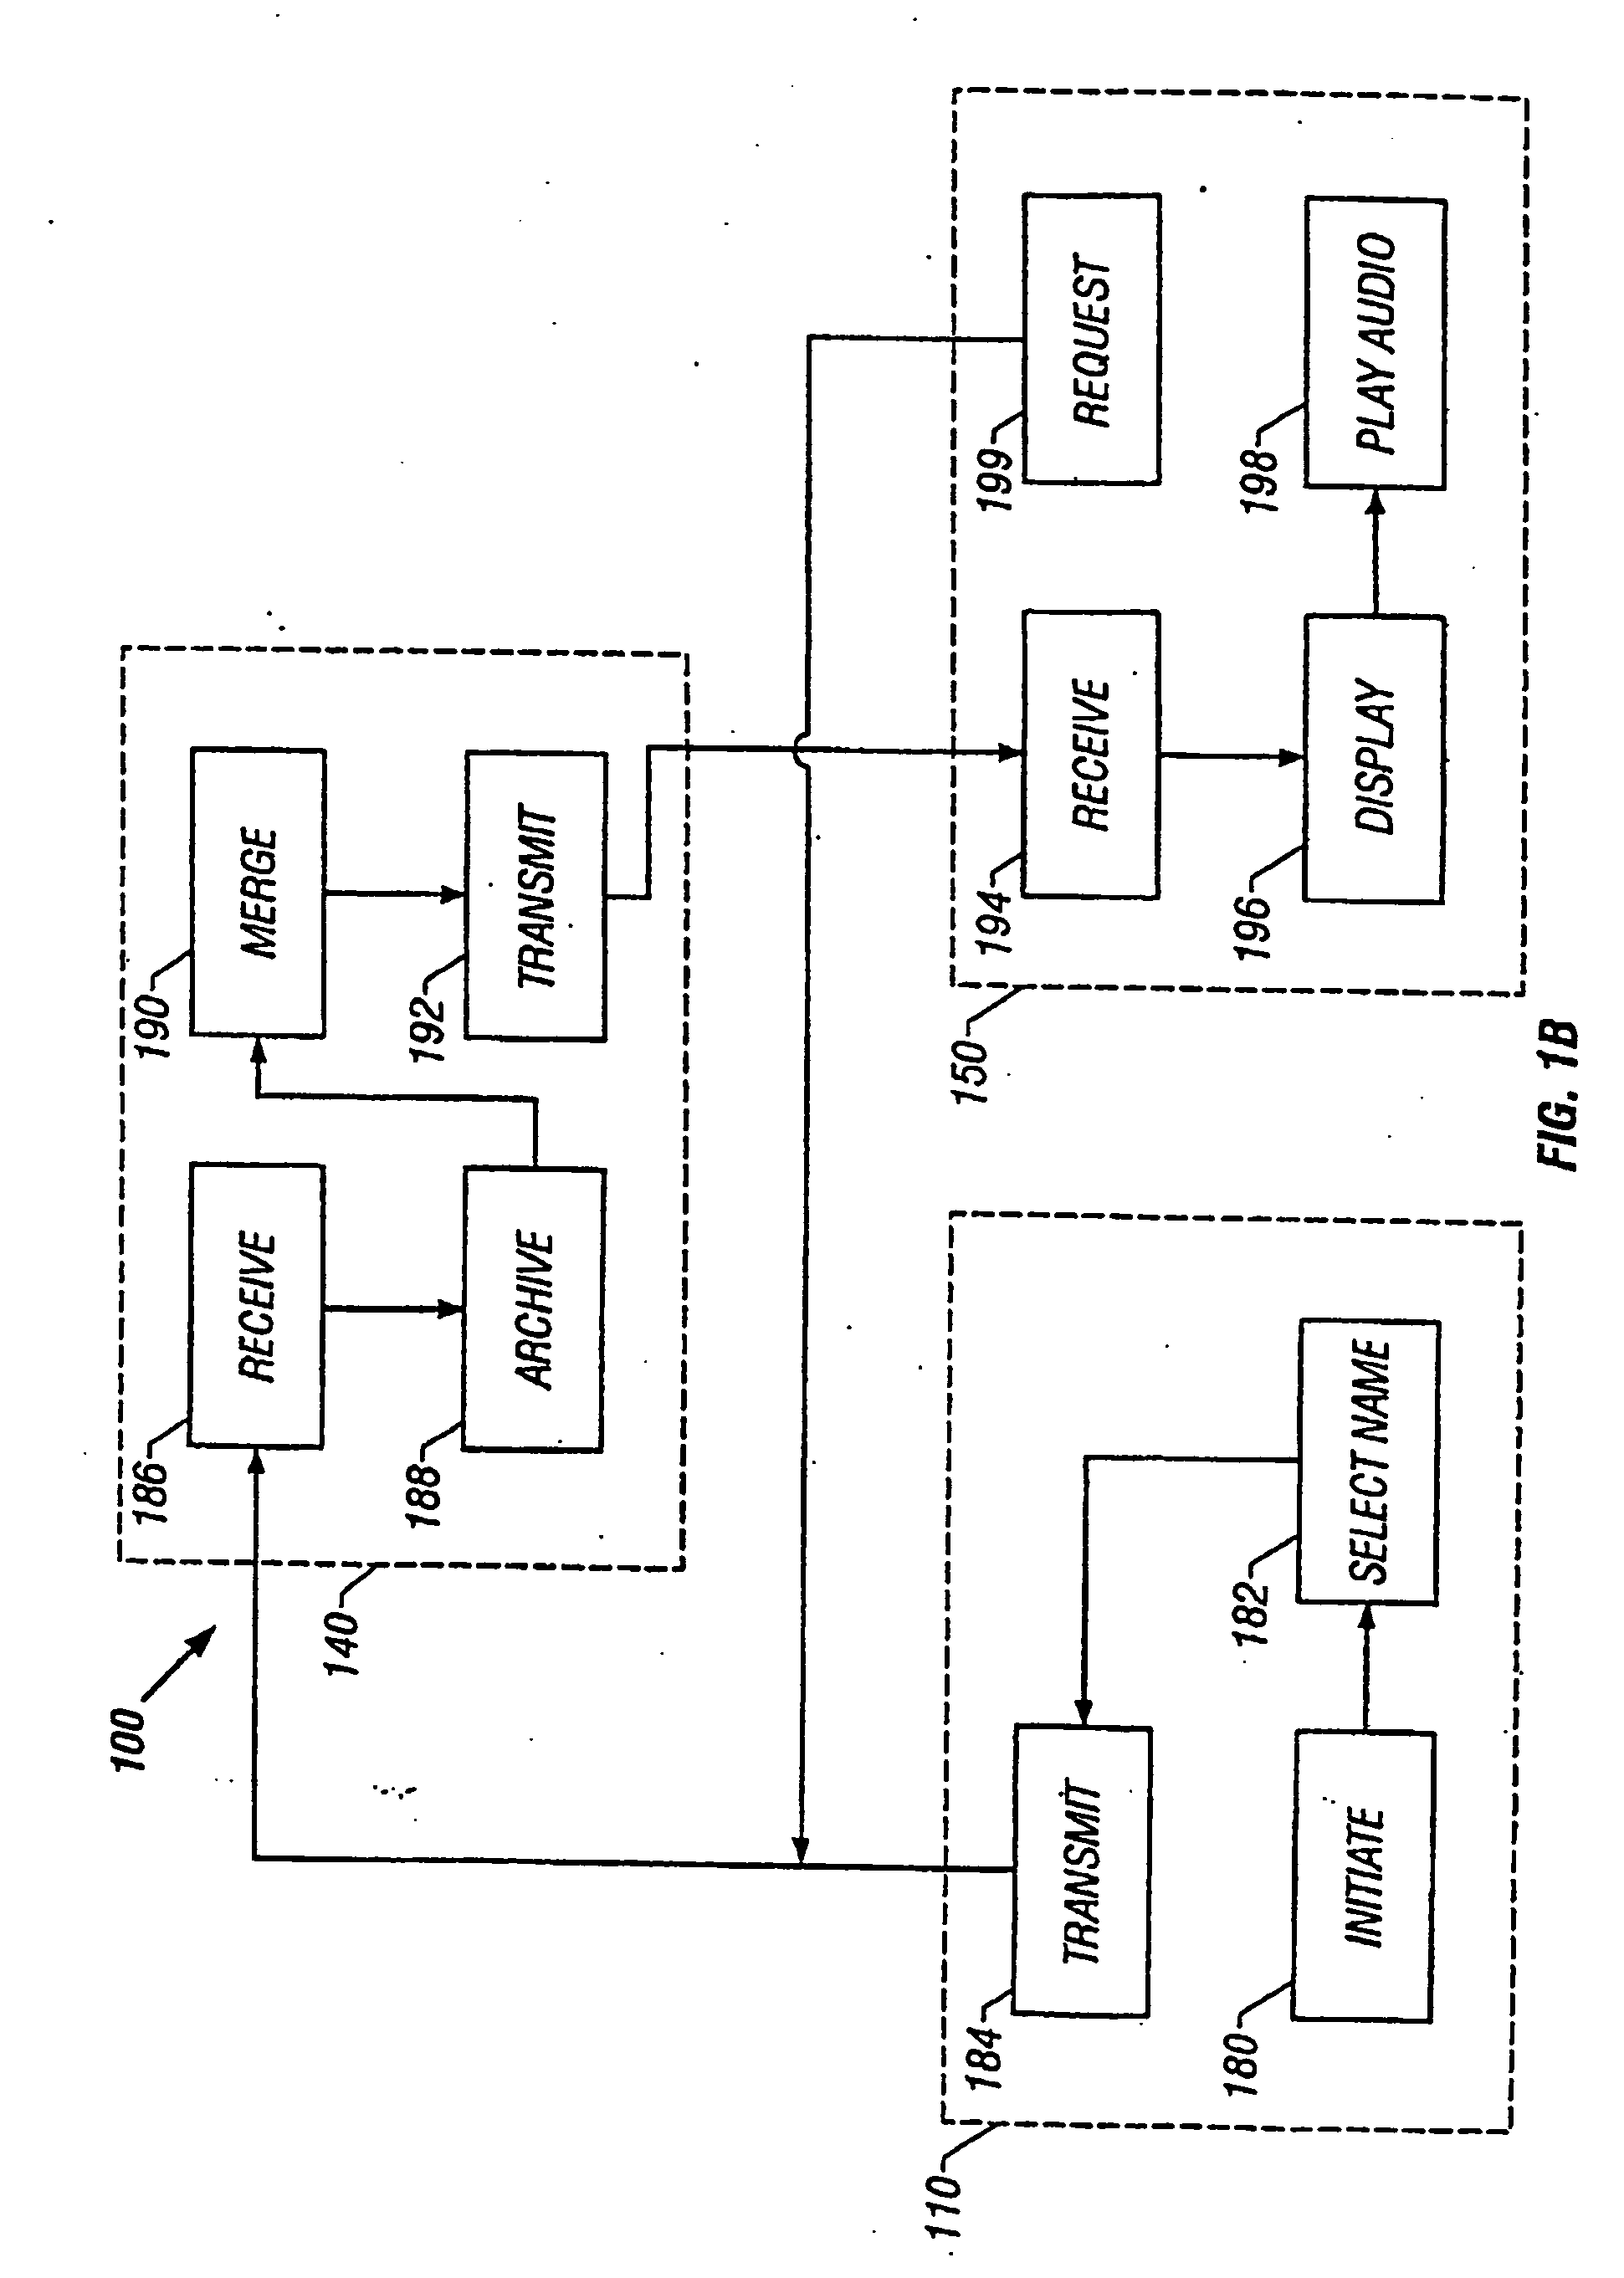 System and method for record and playback of collaborative communications session